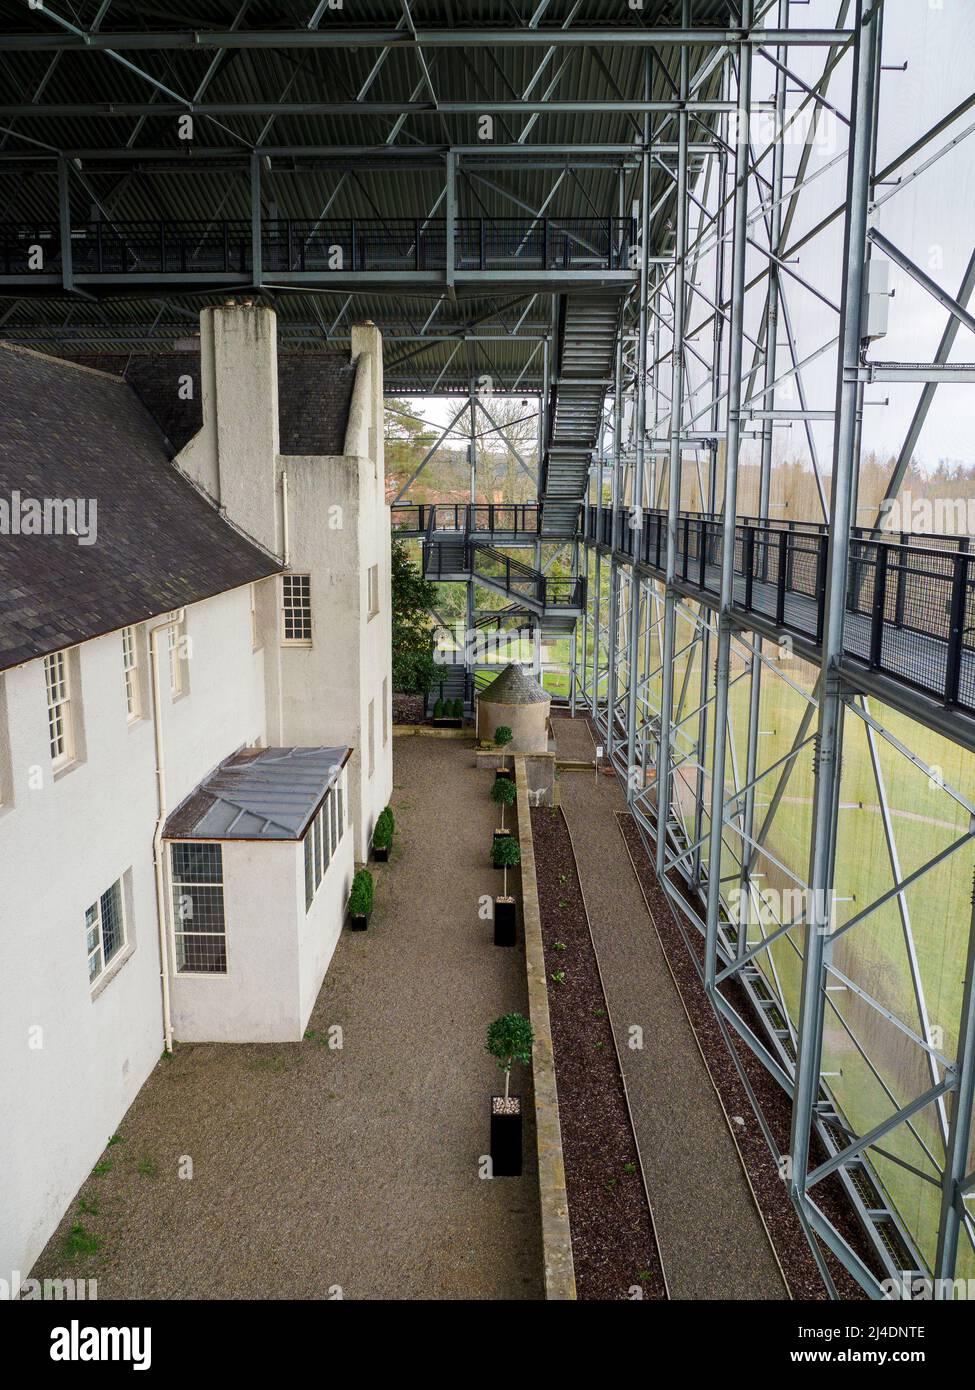 Hill House in Helensburgh, Scotland, seen from within its protective box.  House designed in 1902 by Charles Rennie Mackintosh and Margaret Macdonald. Stock Photo